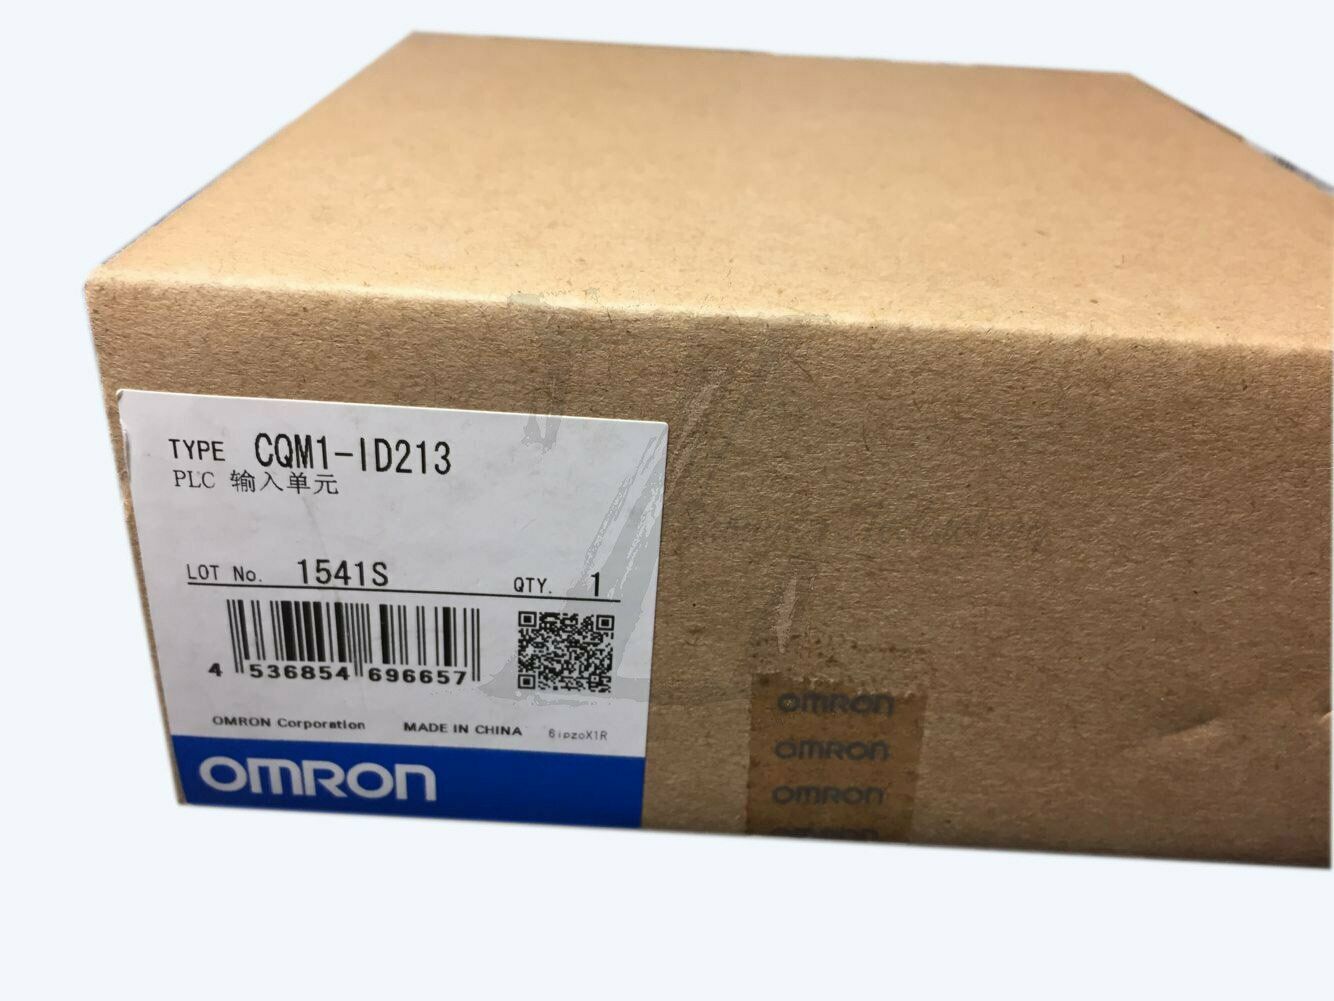 1pc new Omron CQM1-ID213 module one year warranty KOEED 1, 80%, import_2020_10_10_031751, Omron, Other